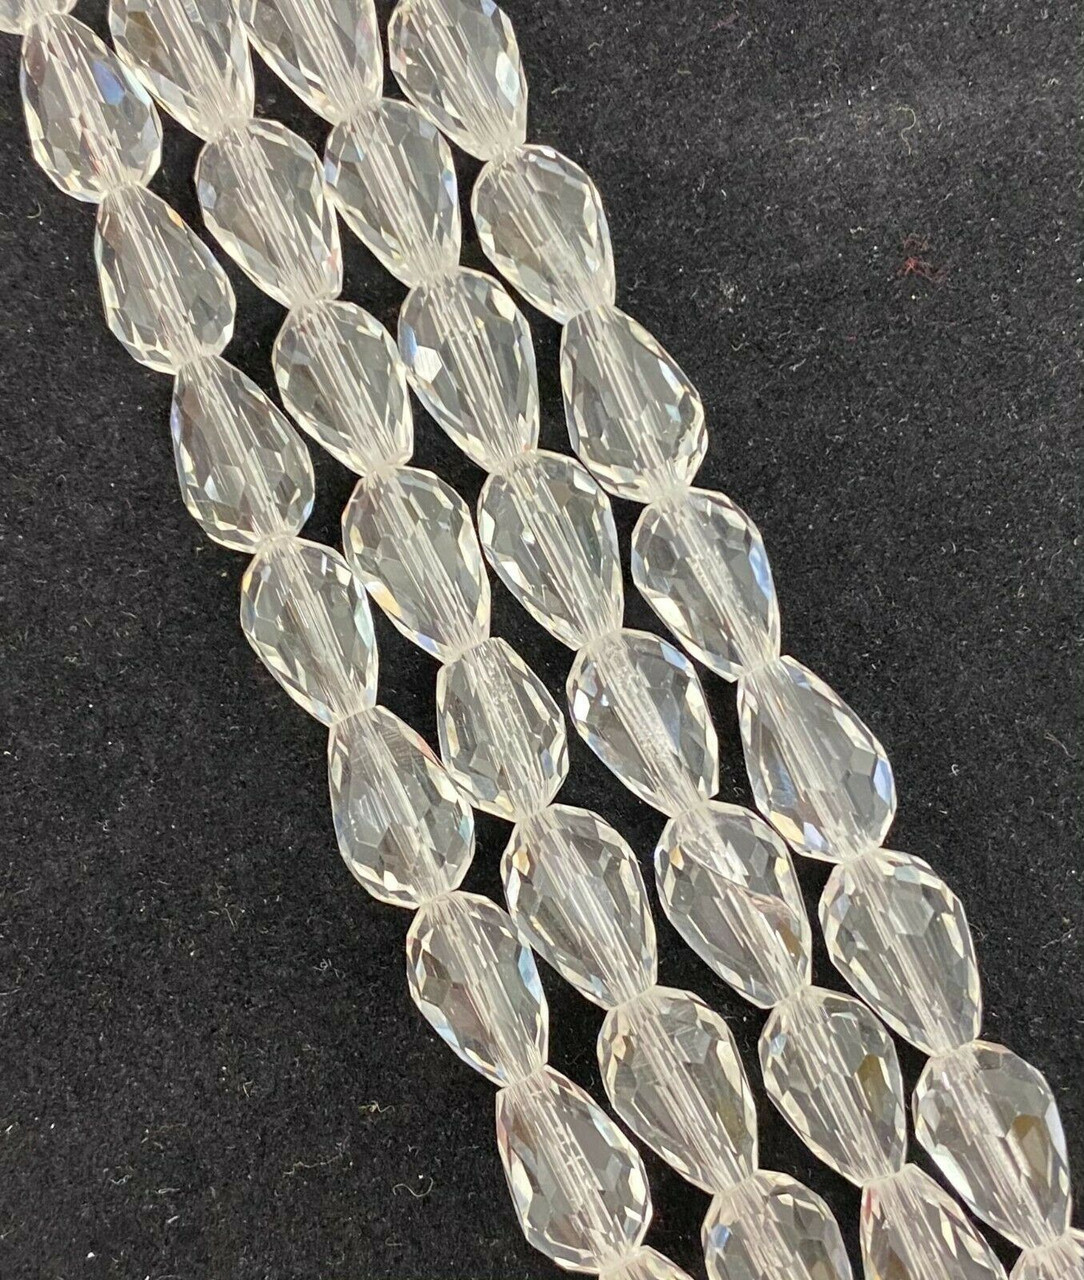 Strand of faceted drop glass beads (briolettes) - approx 6x4mm, Clear, approx 72 beads